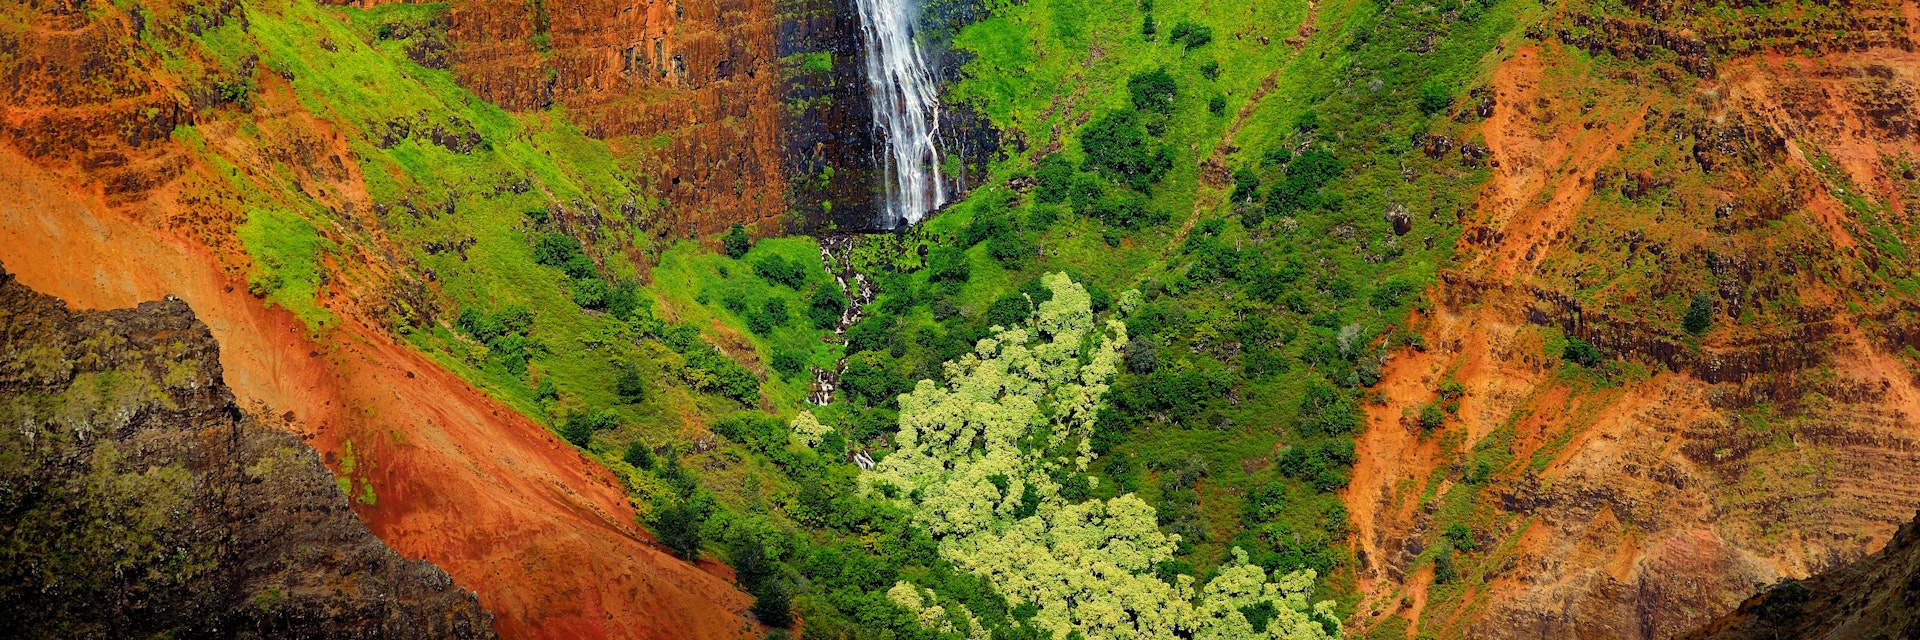 Stunning aerial view into Waimea Canyon, Kauai, Hawaii
234228043
sunlight, island, aerial, destination, warm, nobody, natural, park, state, remote, vibrant, green, tropical, kauai, dream, travel, view, red, rock, peace, valley, shadow, formation, ecology, serene, united, sunlit, clouds, paradise, shade, forest, waterfall, canyon, colorful, panorama, outdoors, tropic, scenic, lush, tourism, scene, background, nature, exotic, peaceful, tranquil, hawaii, vacation, landscape, waimea